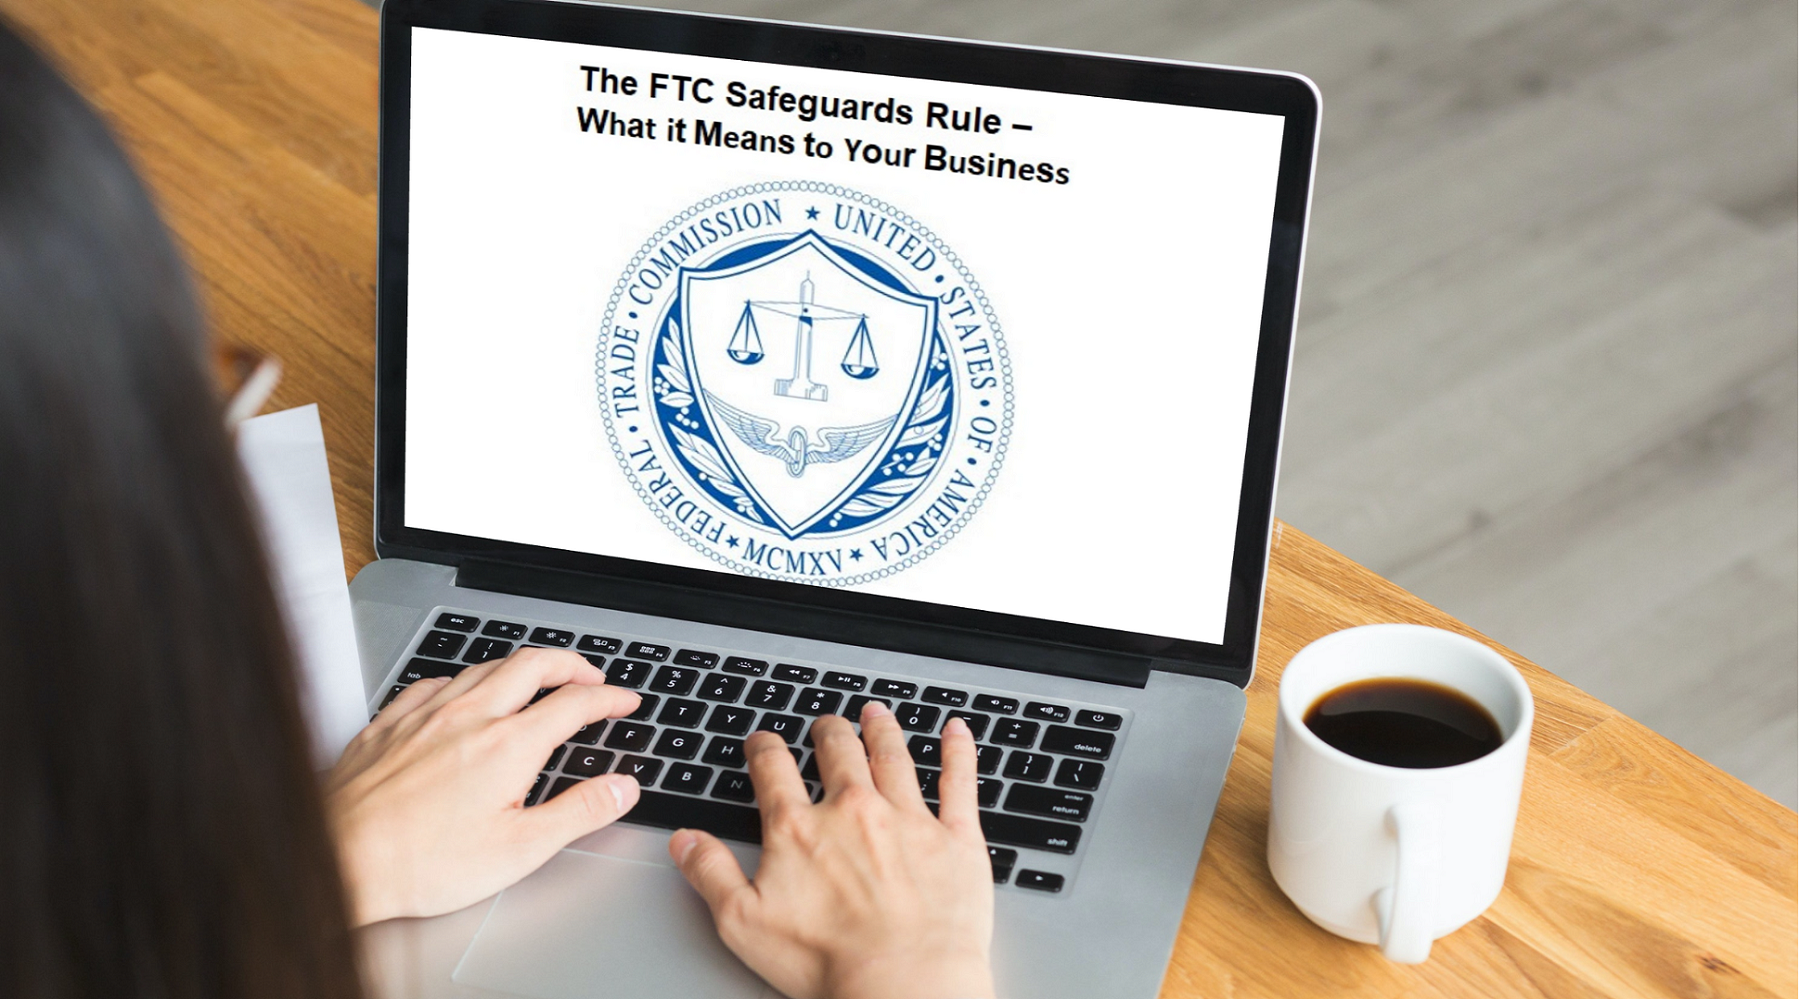 Truvantis - The FTC Safeguards Rule – What it Means to Your Business